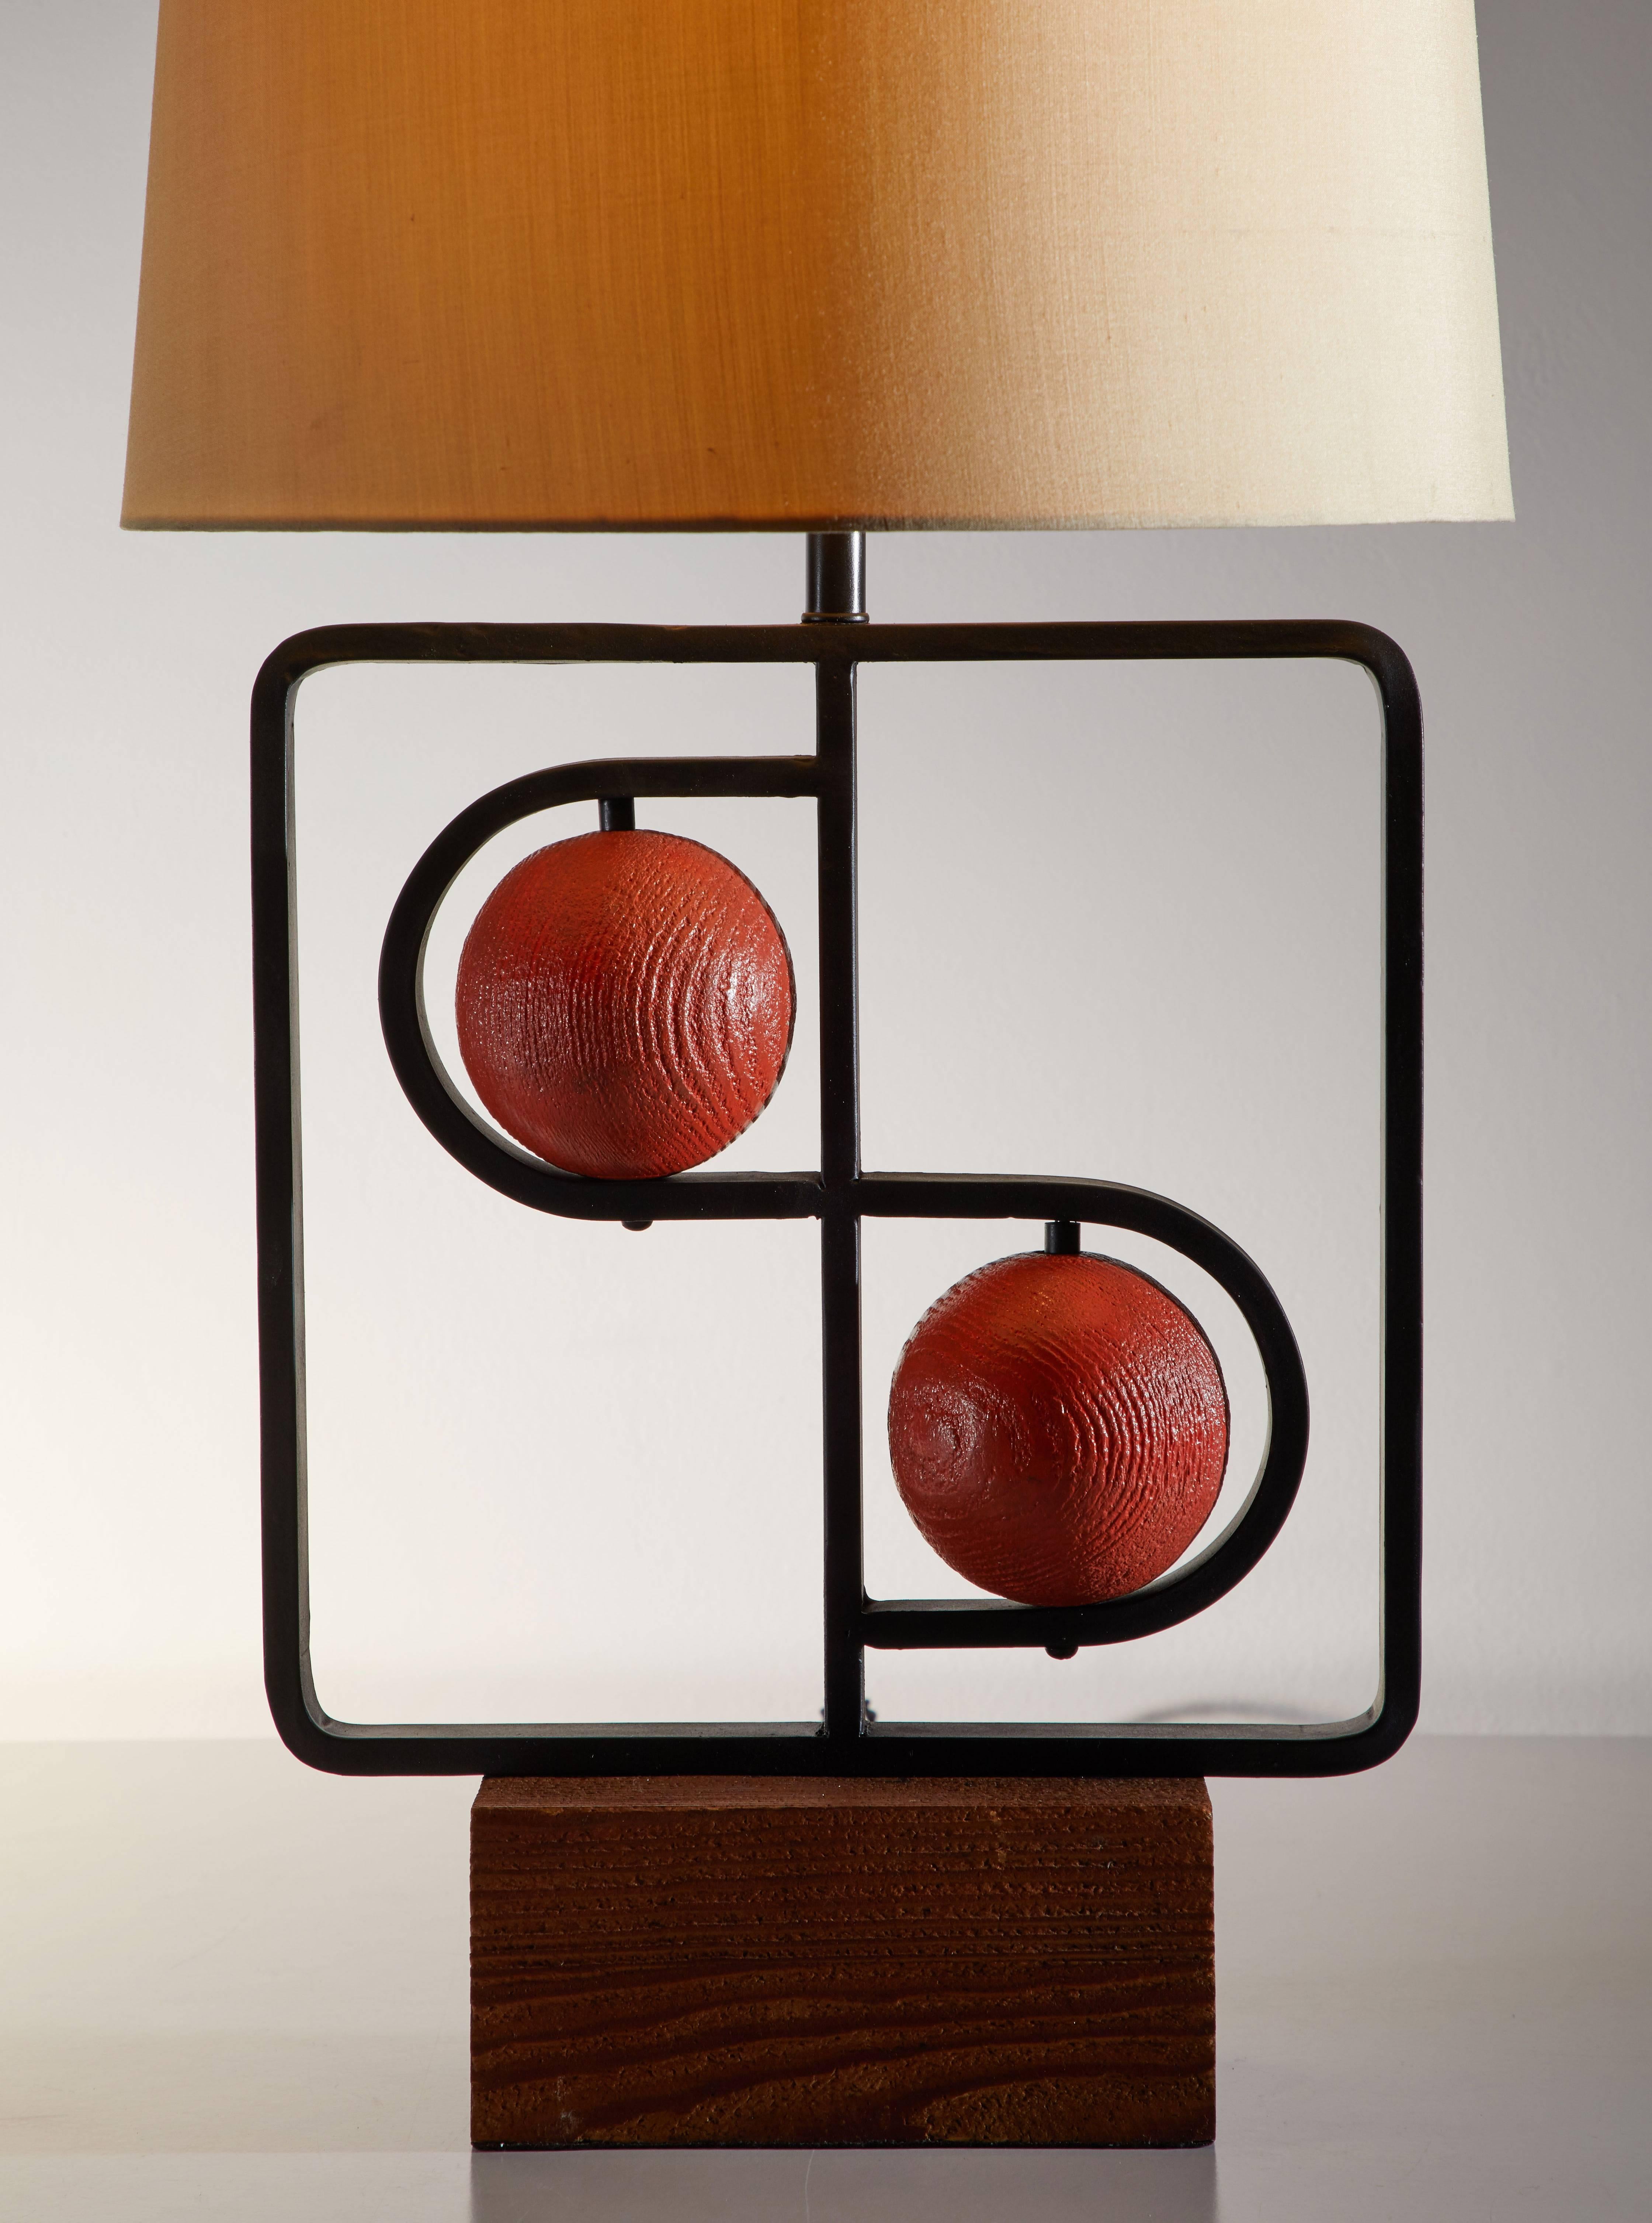 Double D table lamp by Mutual Sunset Lamp Co. designed in the USA, circa 1950s. Iron base with wooden spheres. Shade is for display purposes only. Custom shade fabrication available. Original cord. Takes one E26 75w maximum bulb.